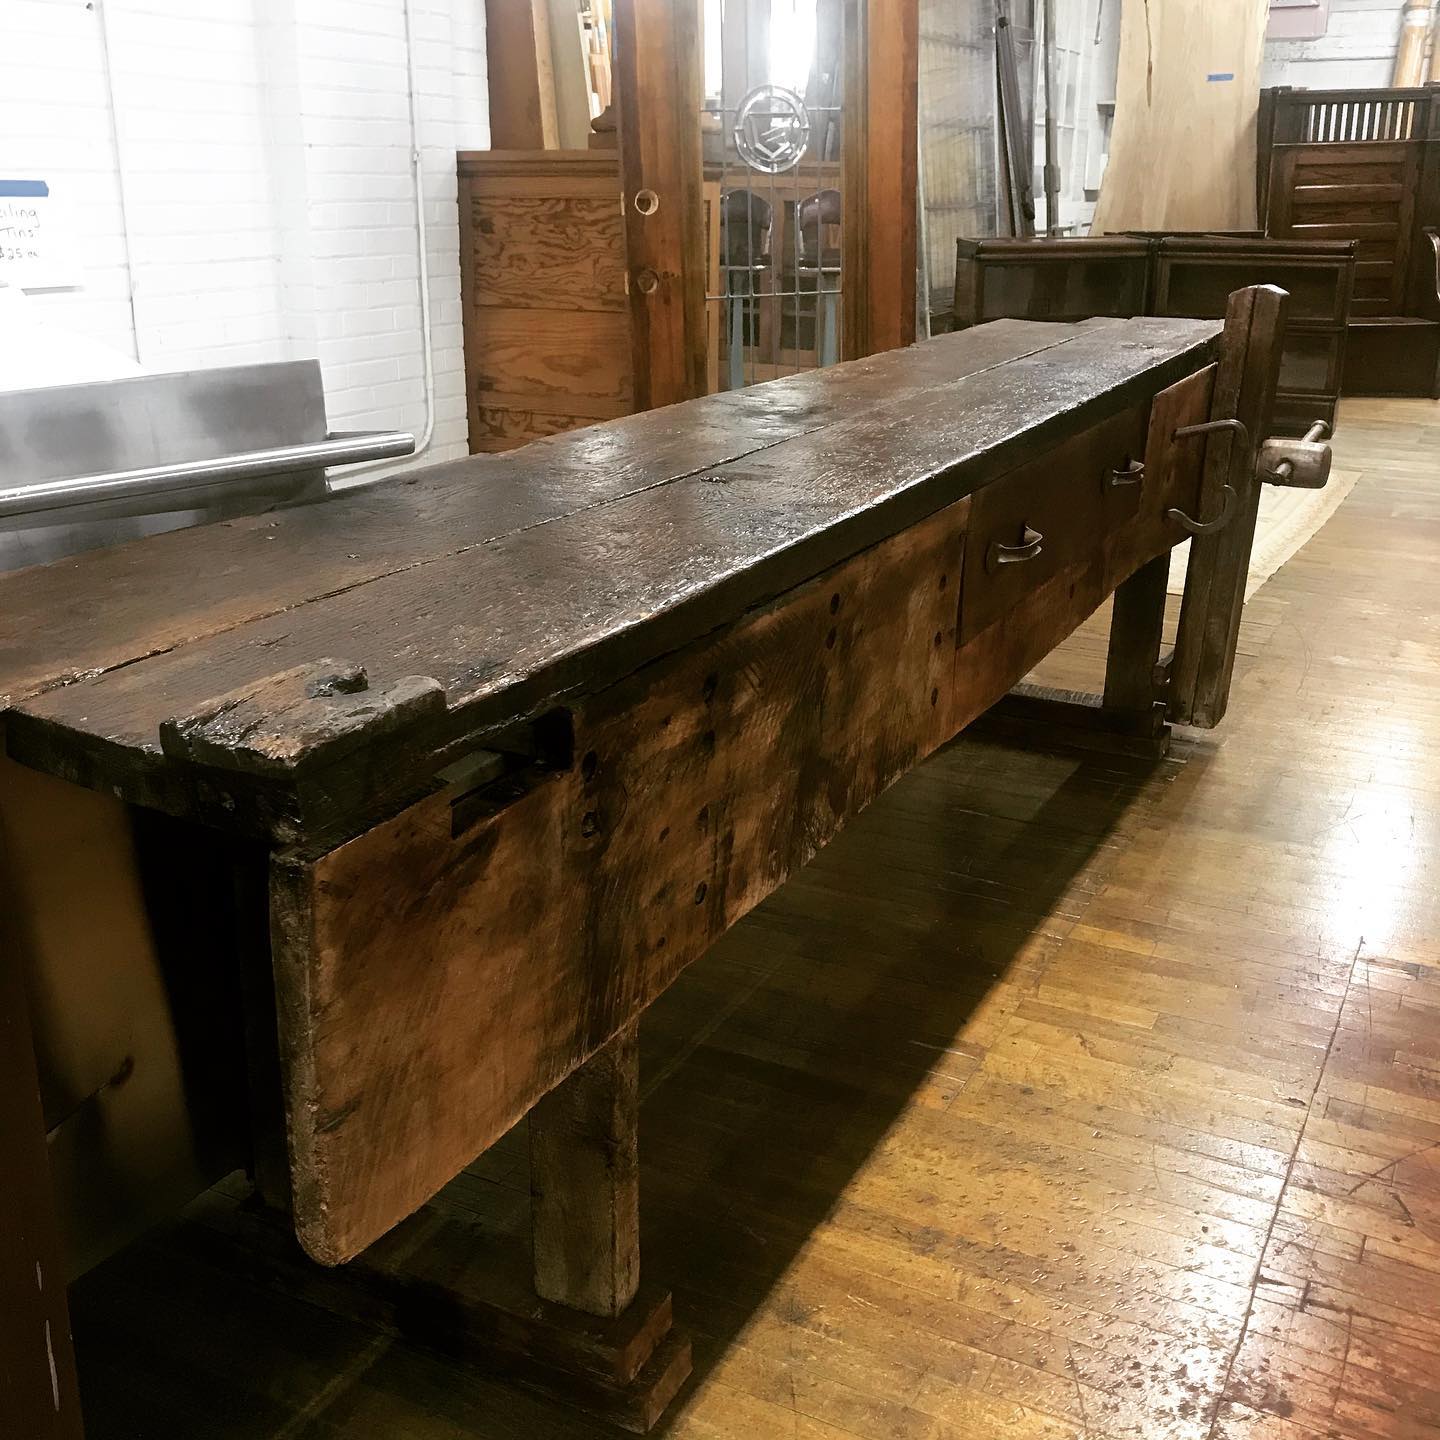 Antique Work Bench with Wood Screw Vise